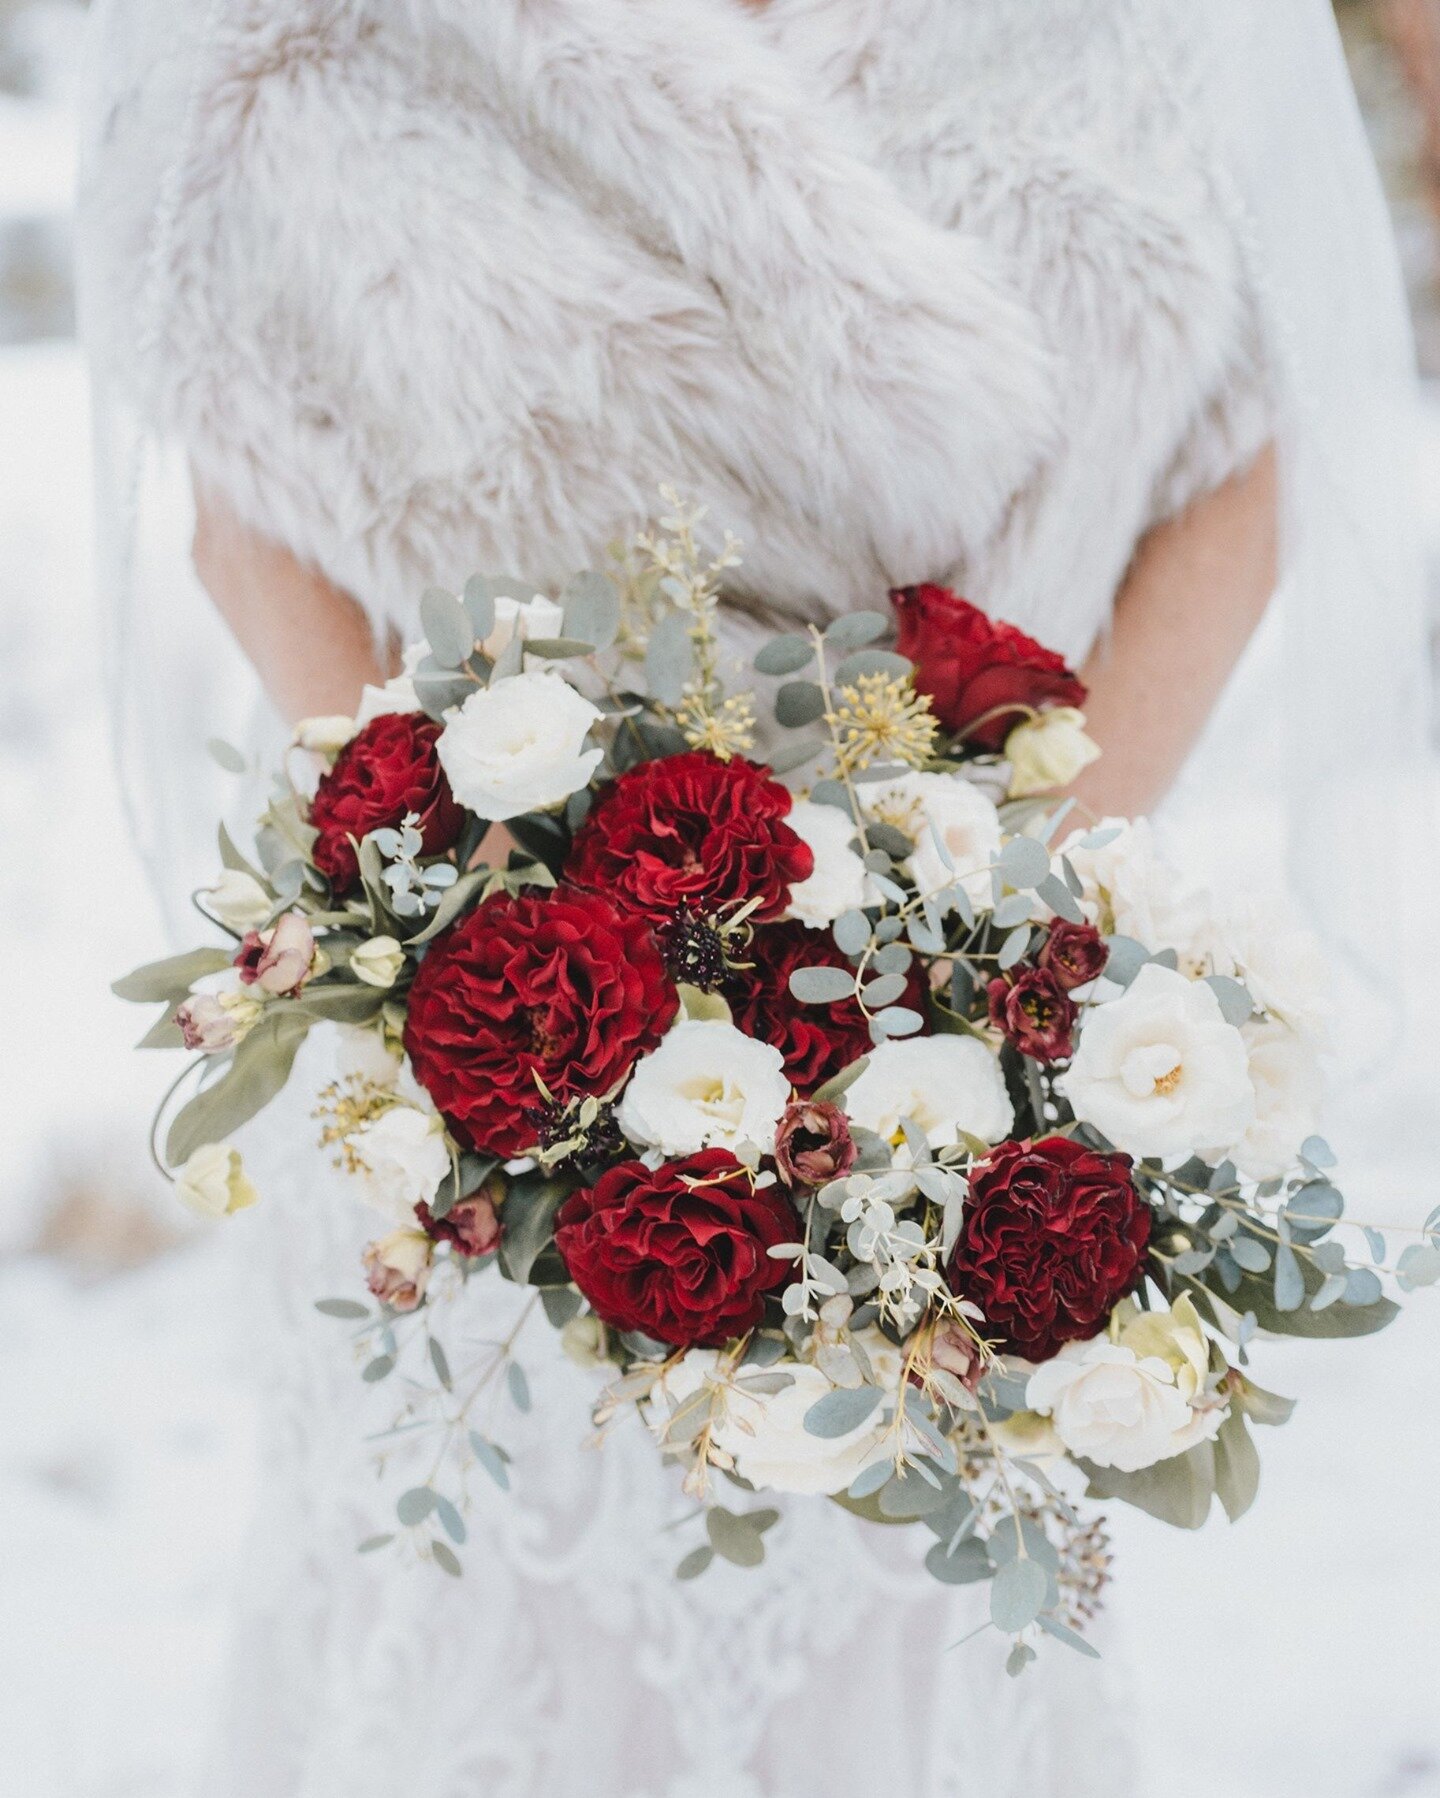 Dreaming of winter florals. These colors are amazing!